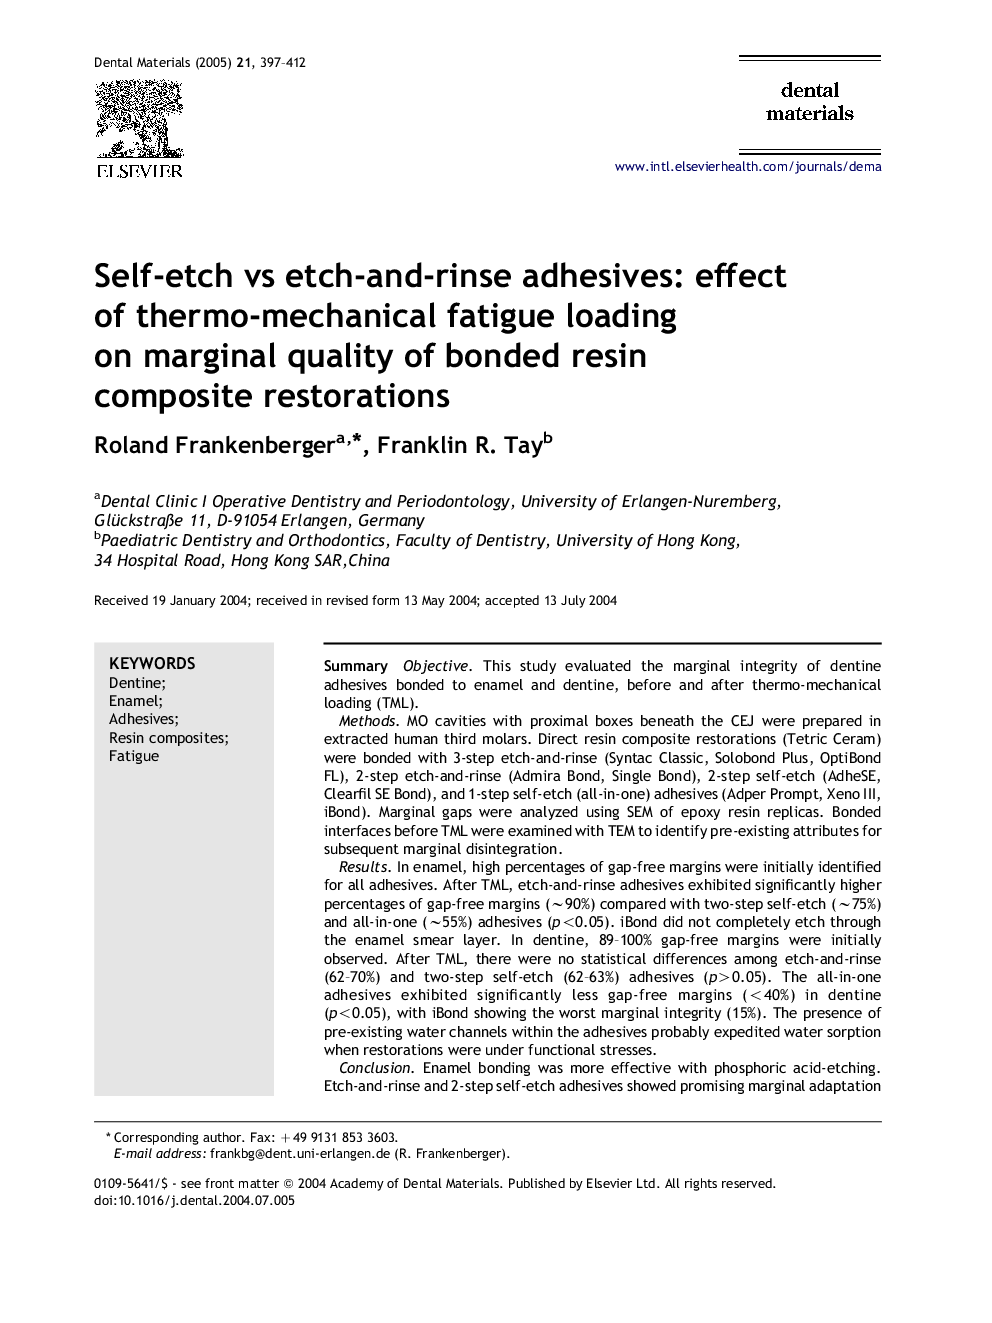 Self-etch vs etch-and-rinse adhesives: effect of thermo-mechanical fatigue loading on marginal quality of bonded resin composite restorations